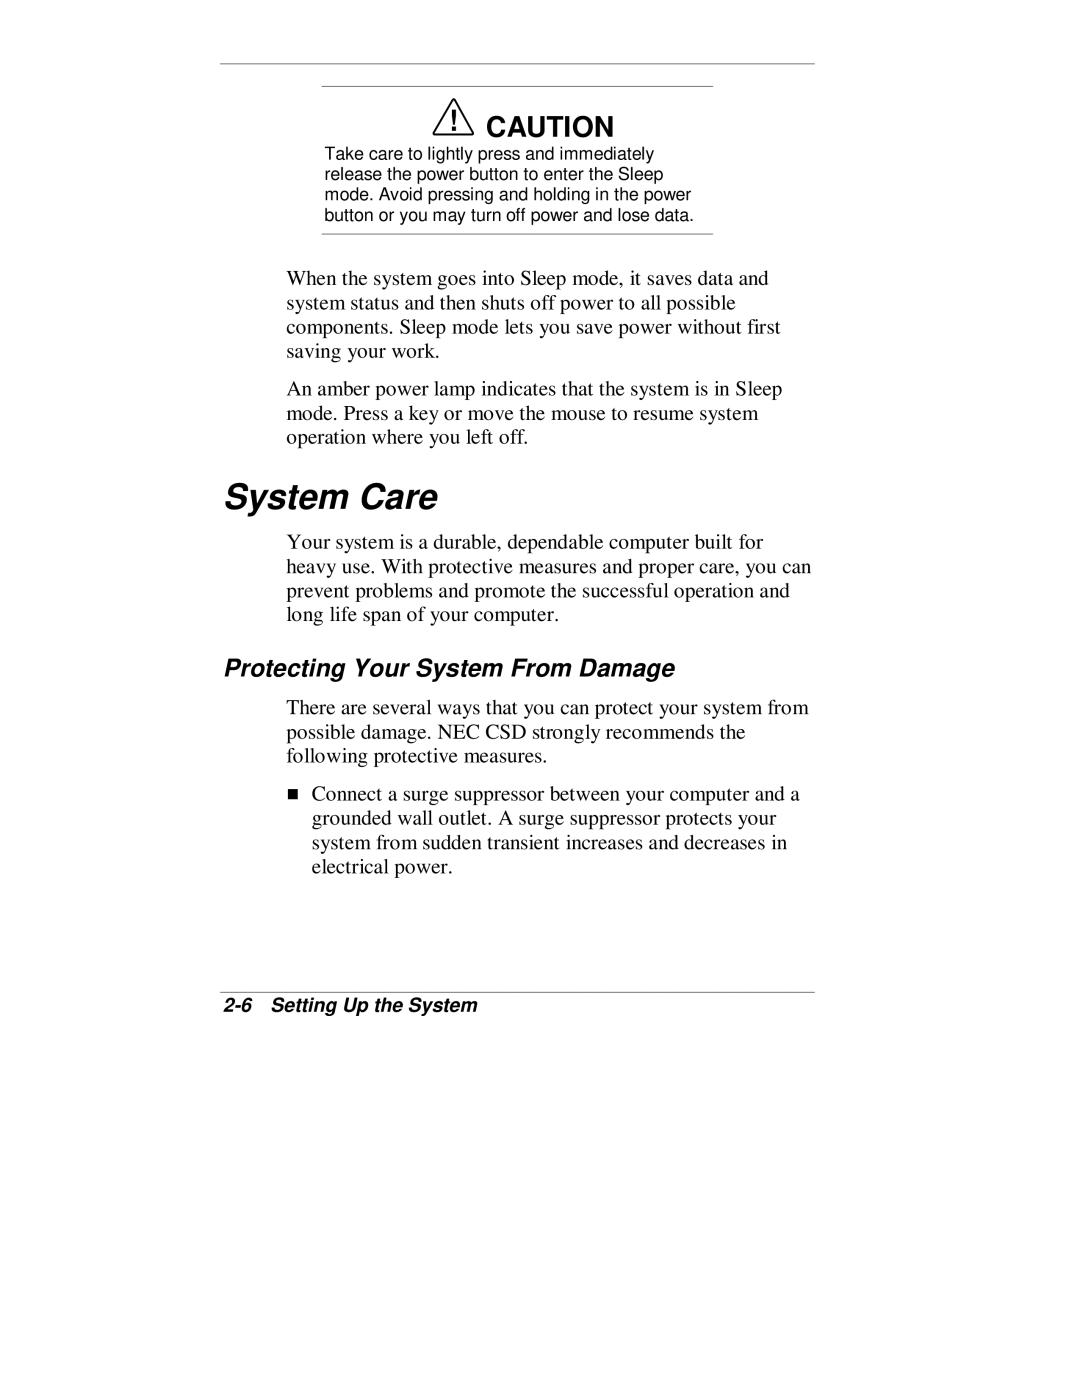 NEC VT 300 Series manual System Care, Protecting Your System From Damage 